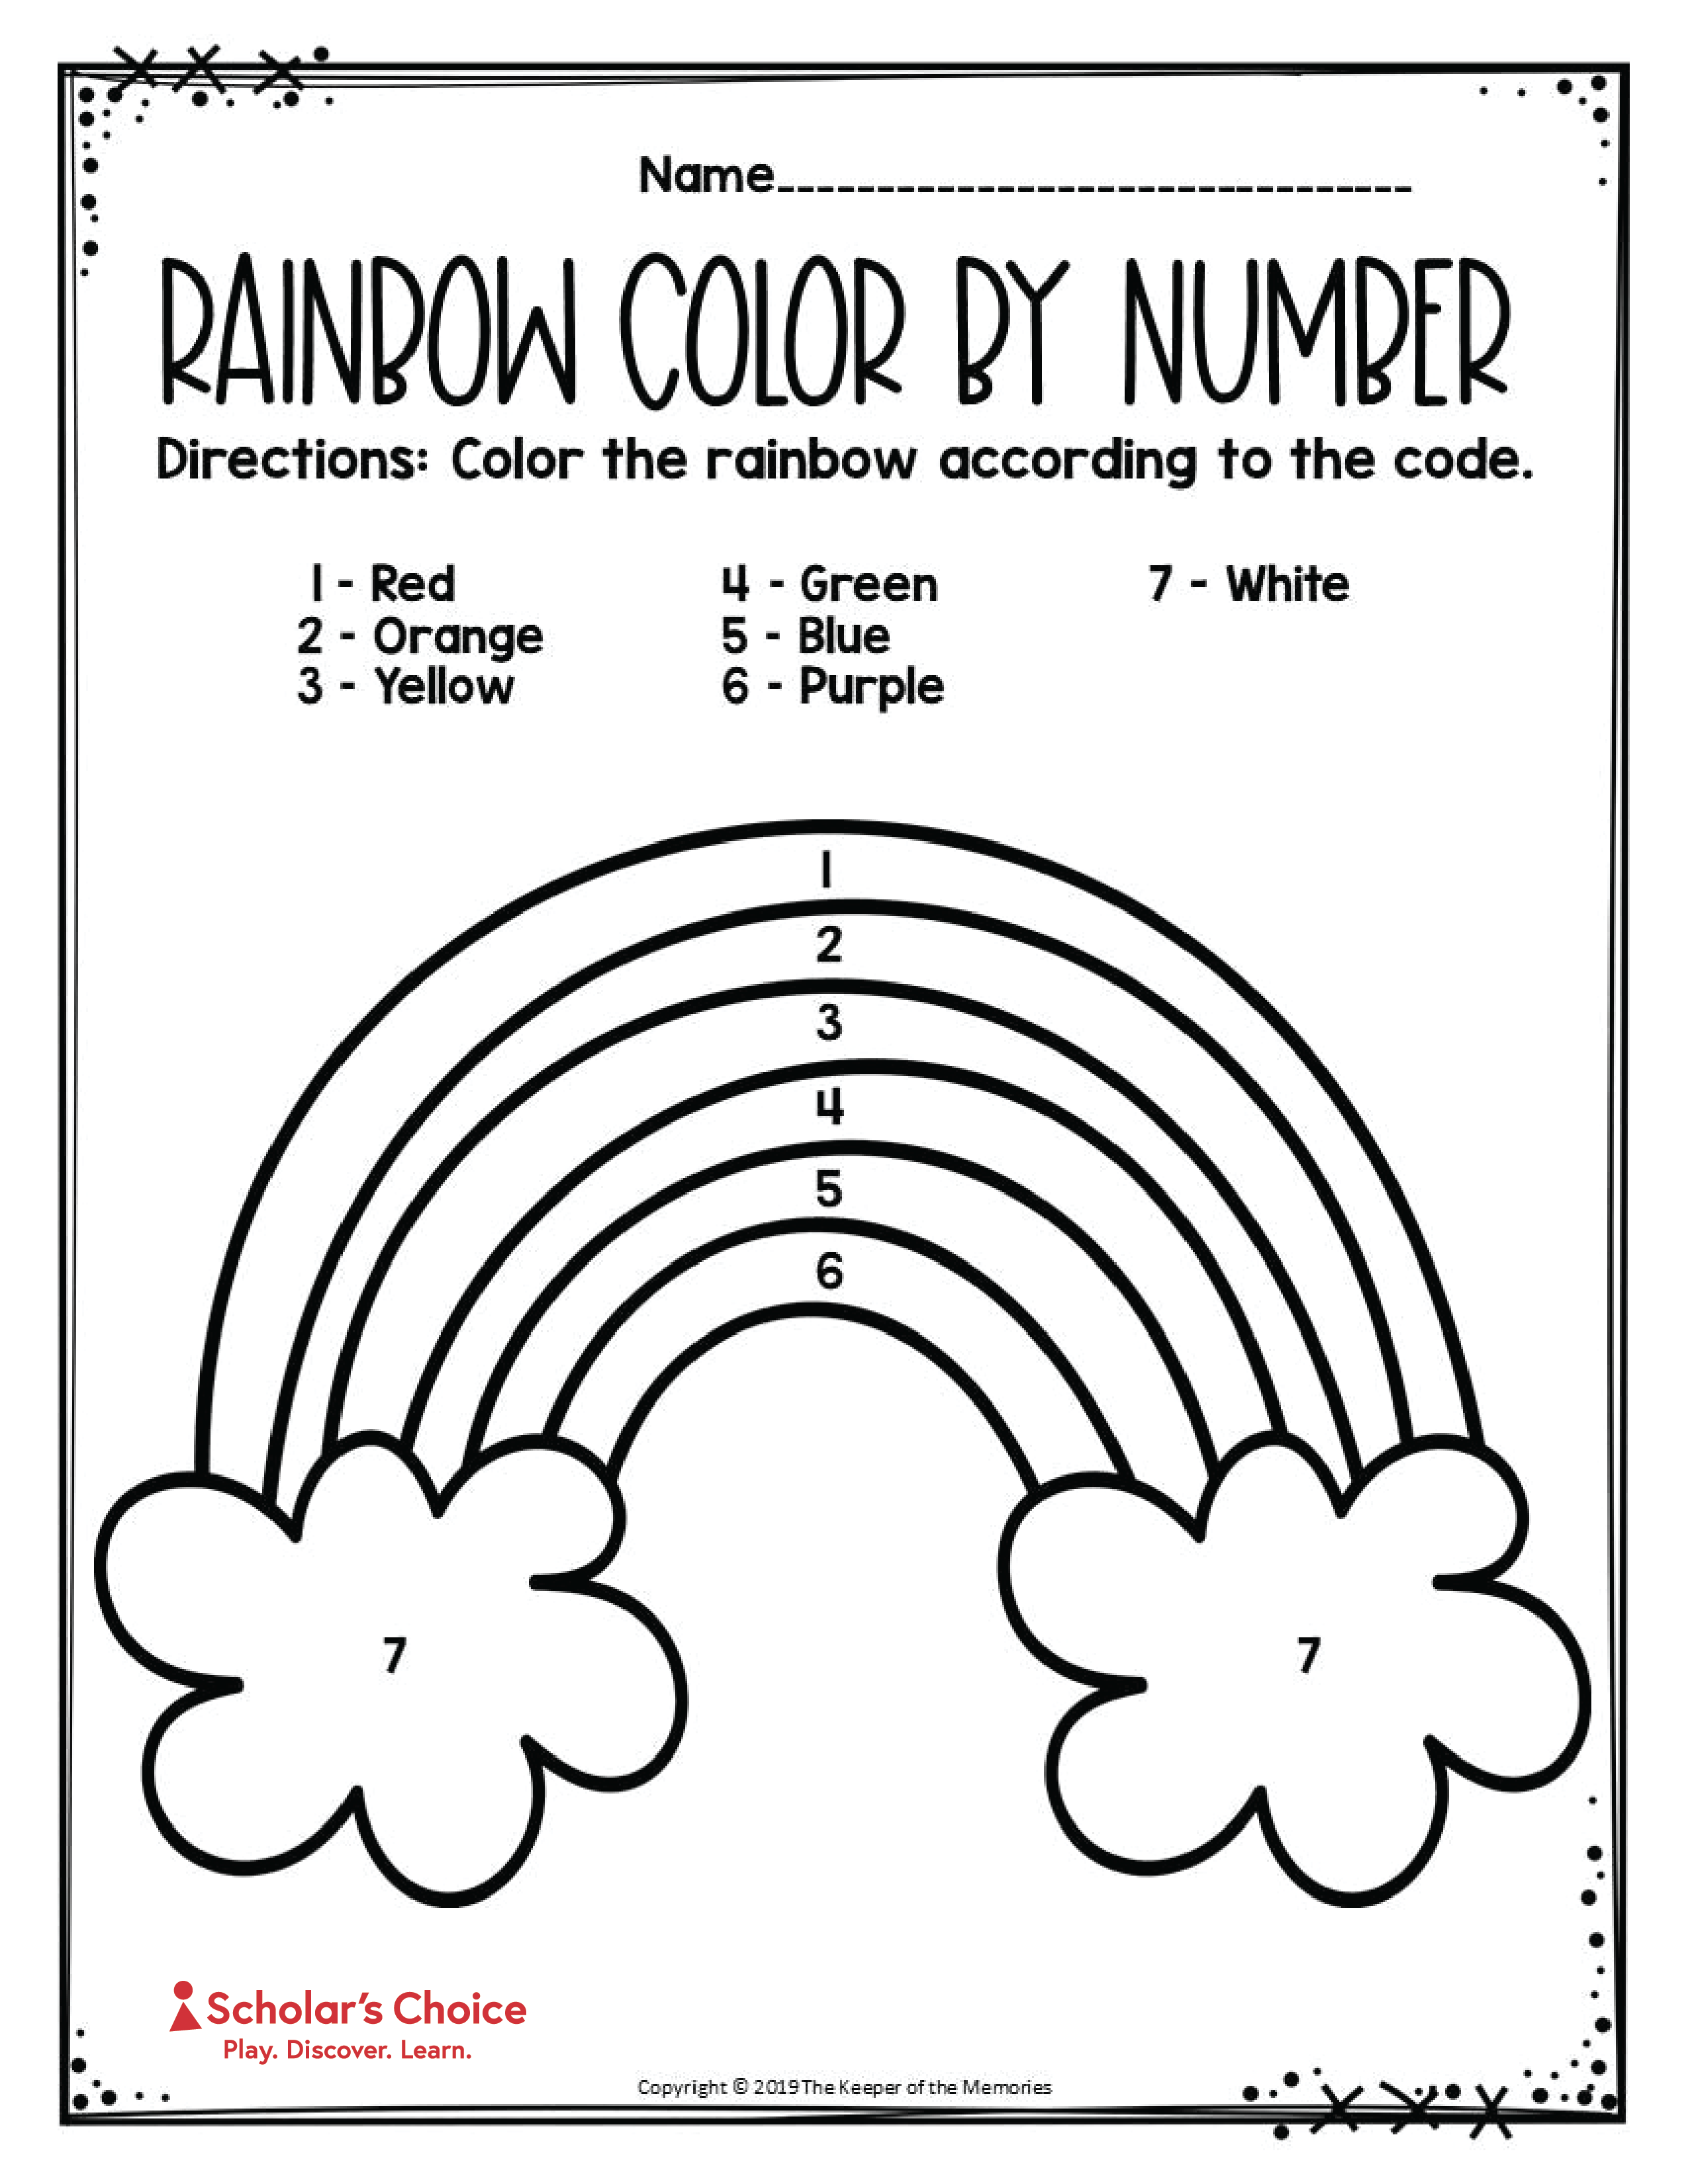 rainbow-activities_colour_by_number